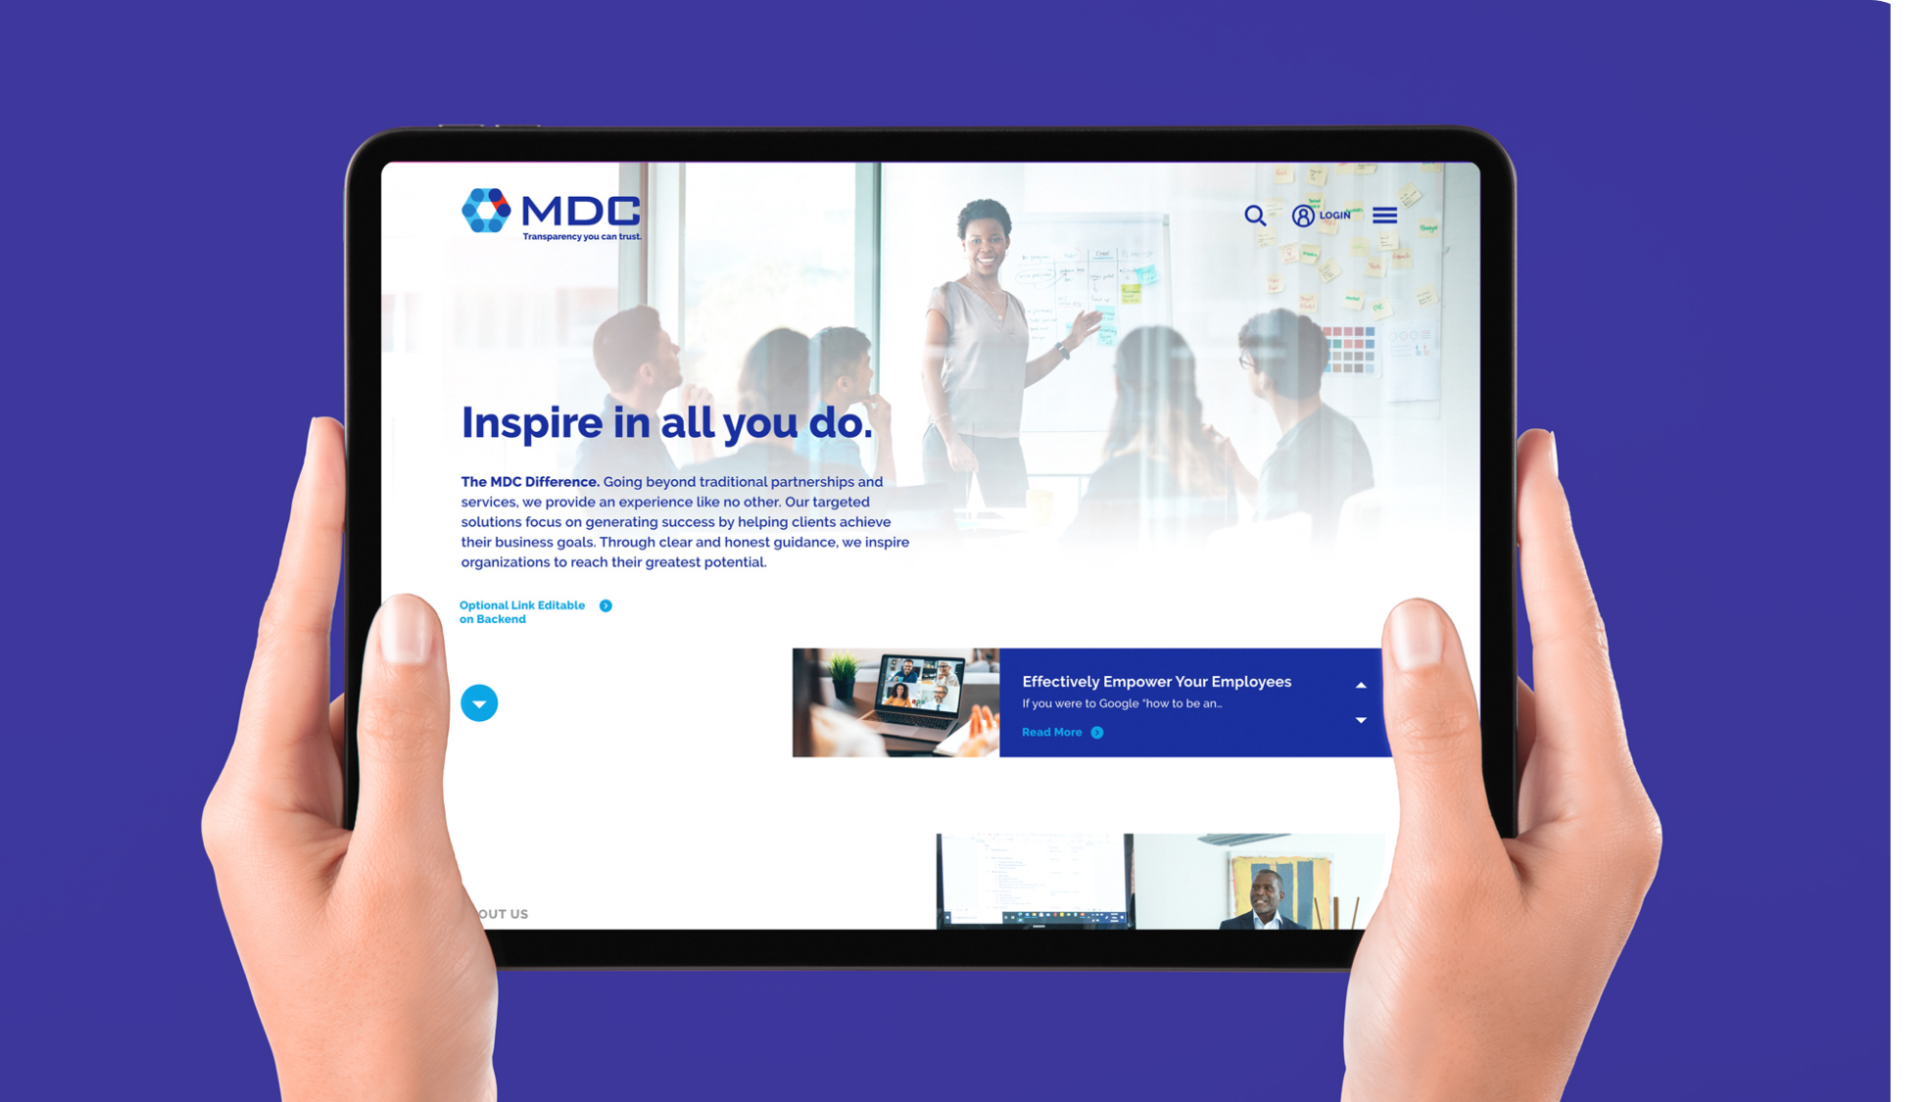 Hands holding a tablet displaying the MDC website with a banner reading "inspire in all you do." with images of professionals in a meeting room.